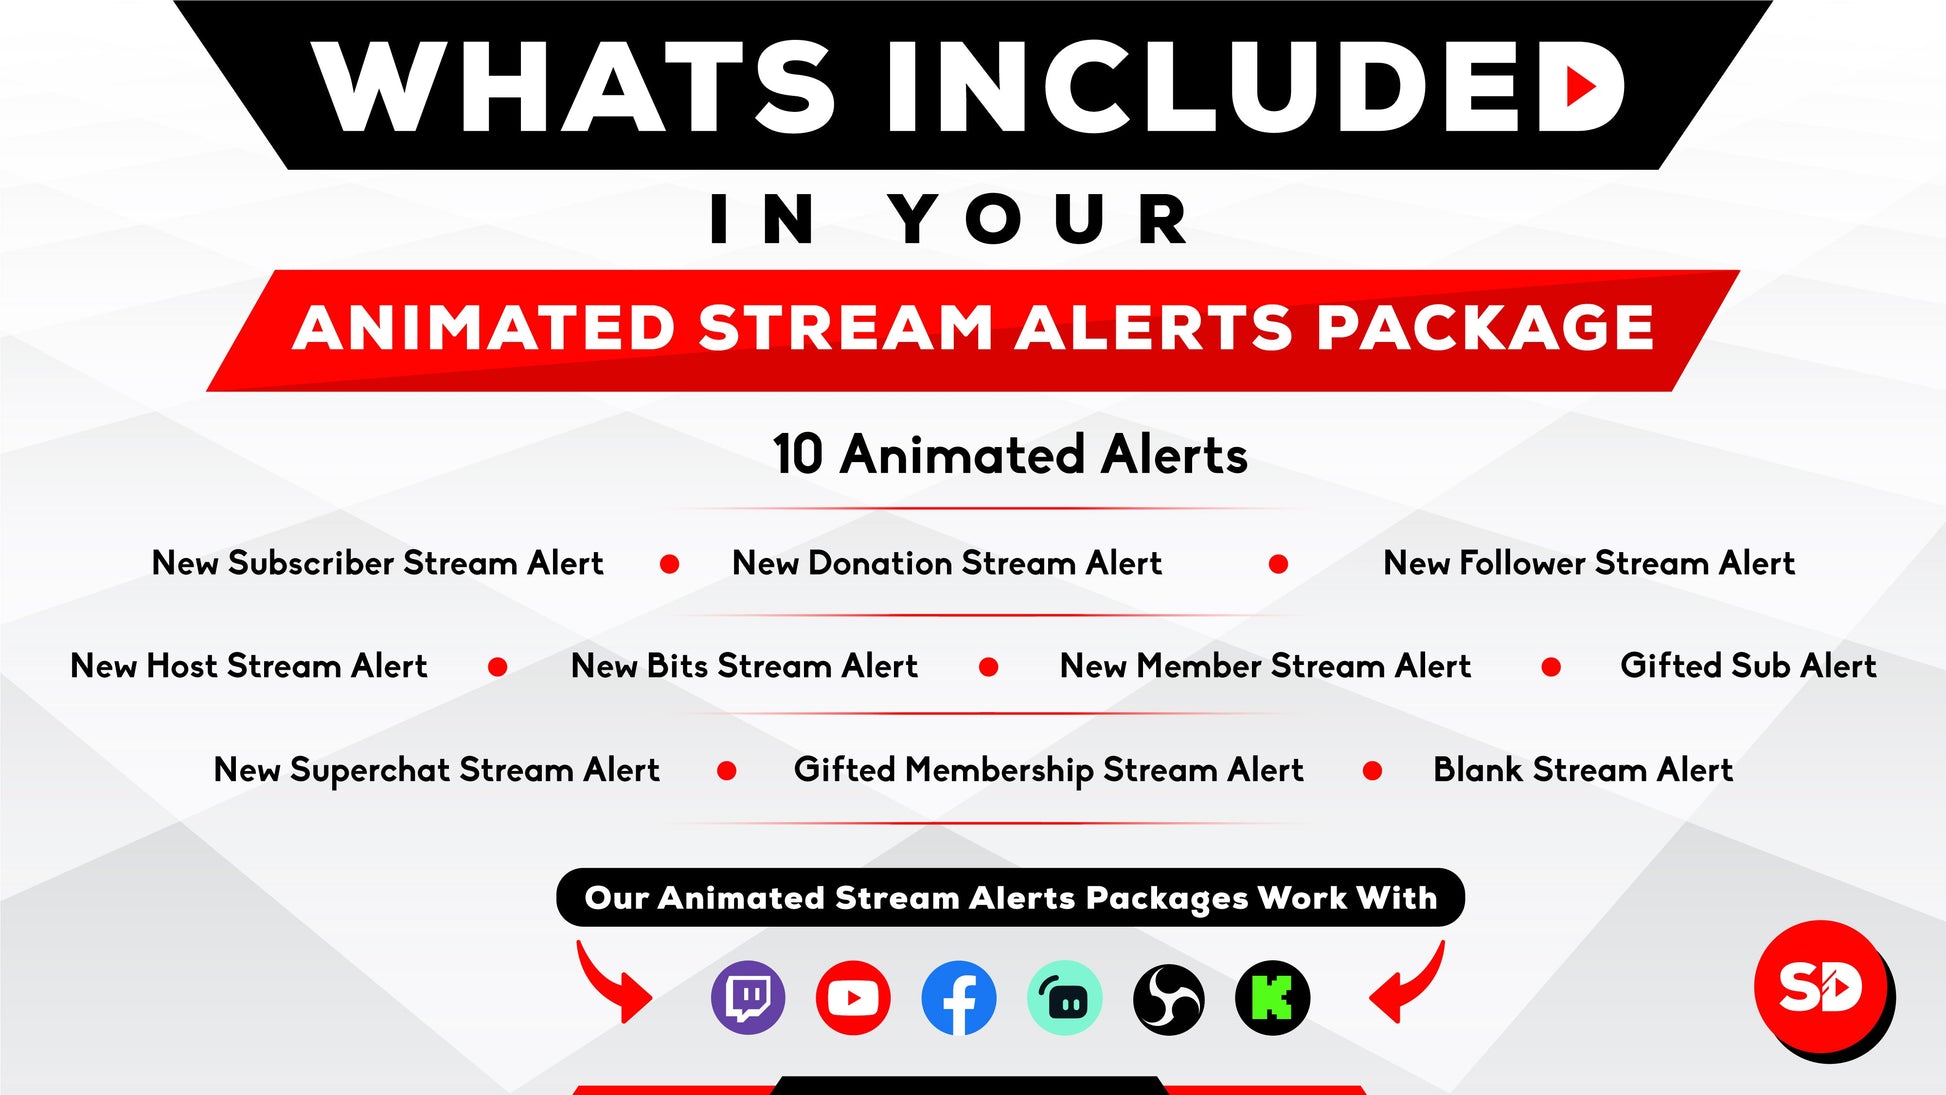 whats included in your package - animated alerts - rogue - stream designz